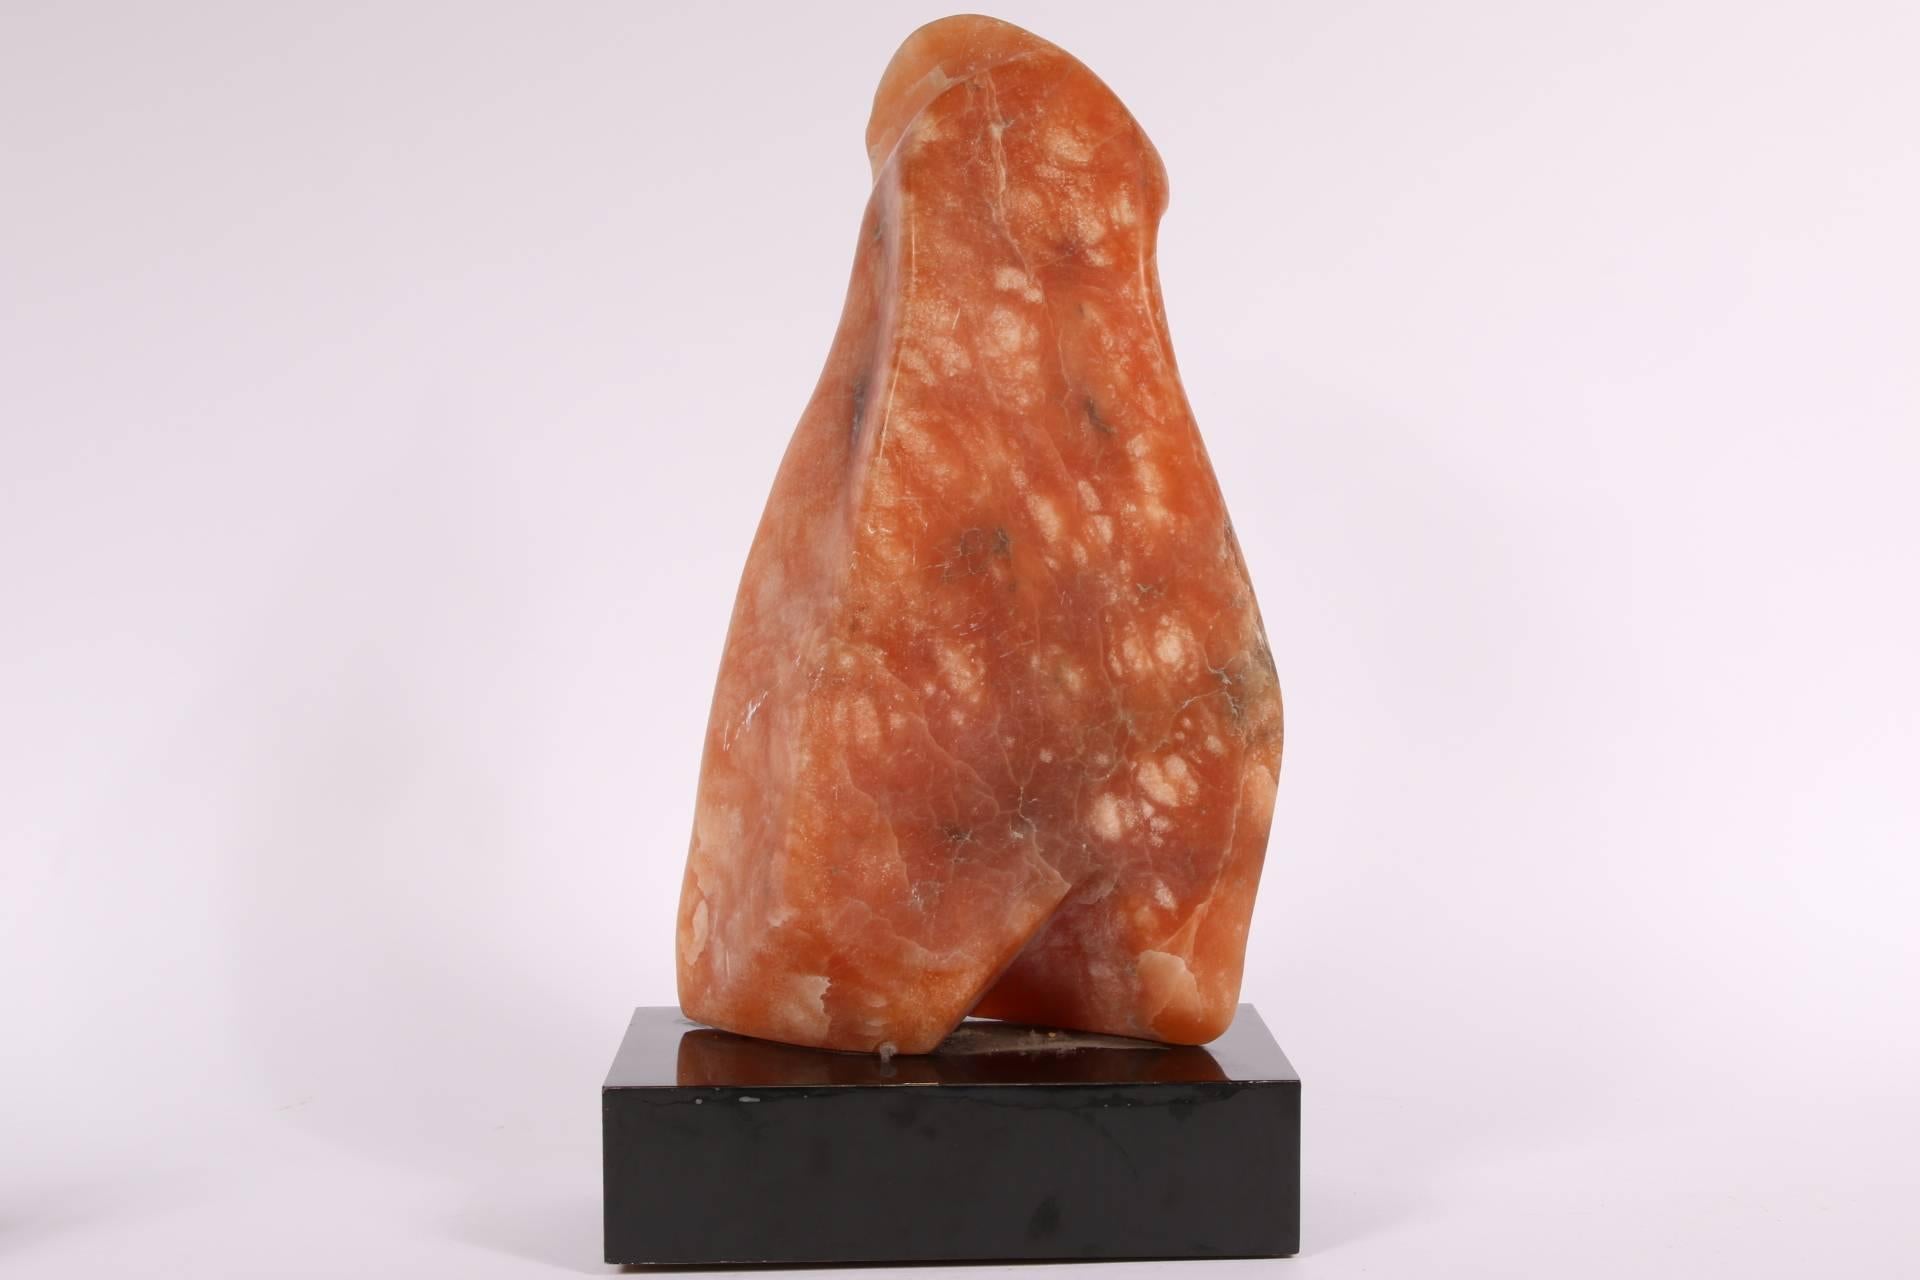 Coral color stone depicting an abstract sculpture, mounted on a black rotating plinth base. Bears brass plaque with title
